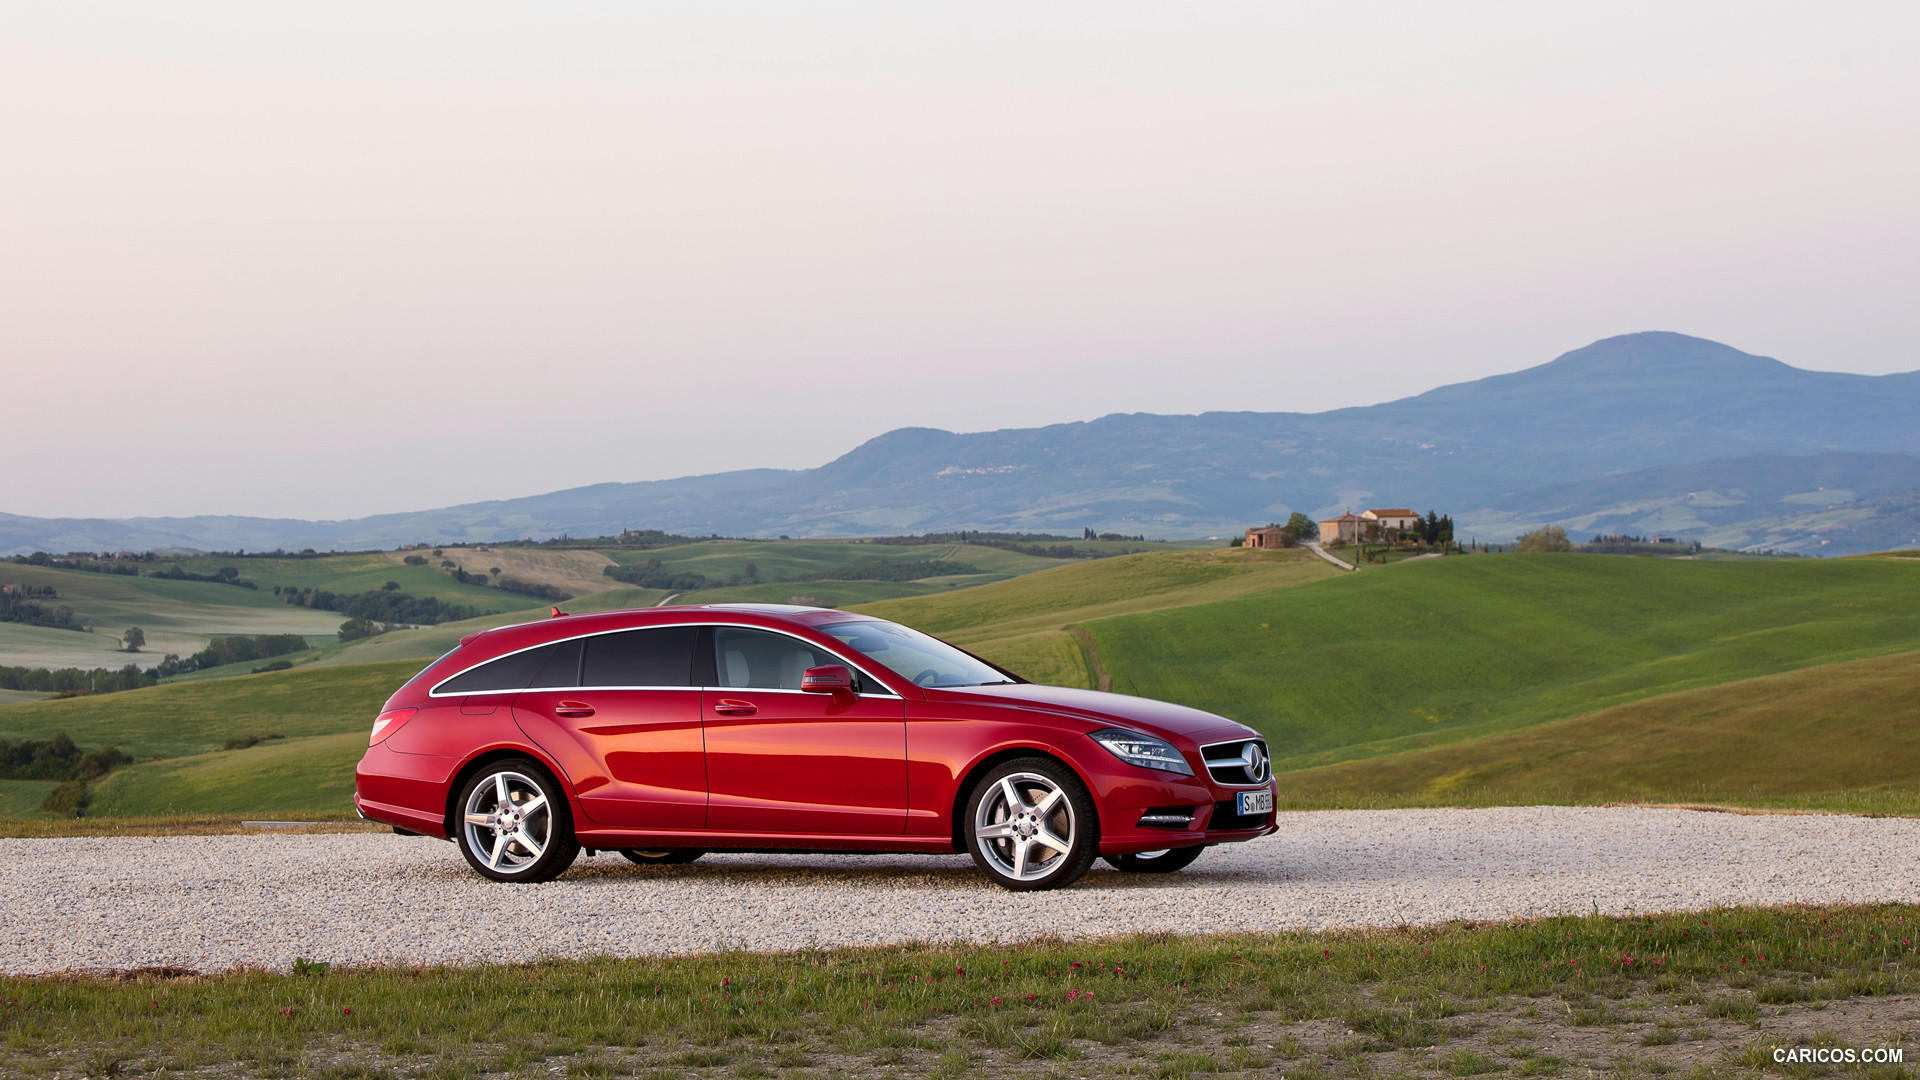 2013 Mercedes-Benz CLS 500 4MATIC Shooting Brake - Side, #15 of 184